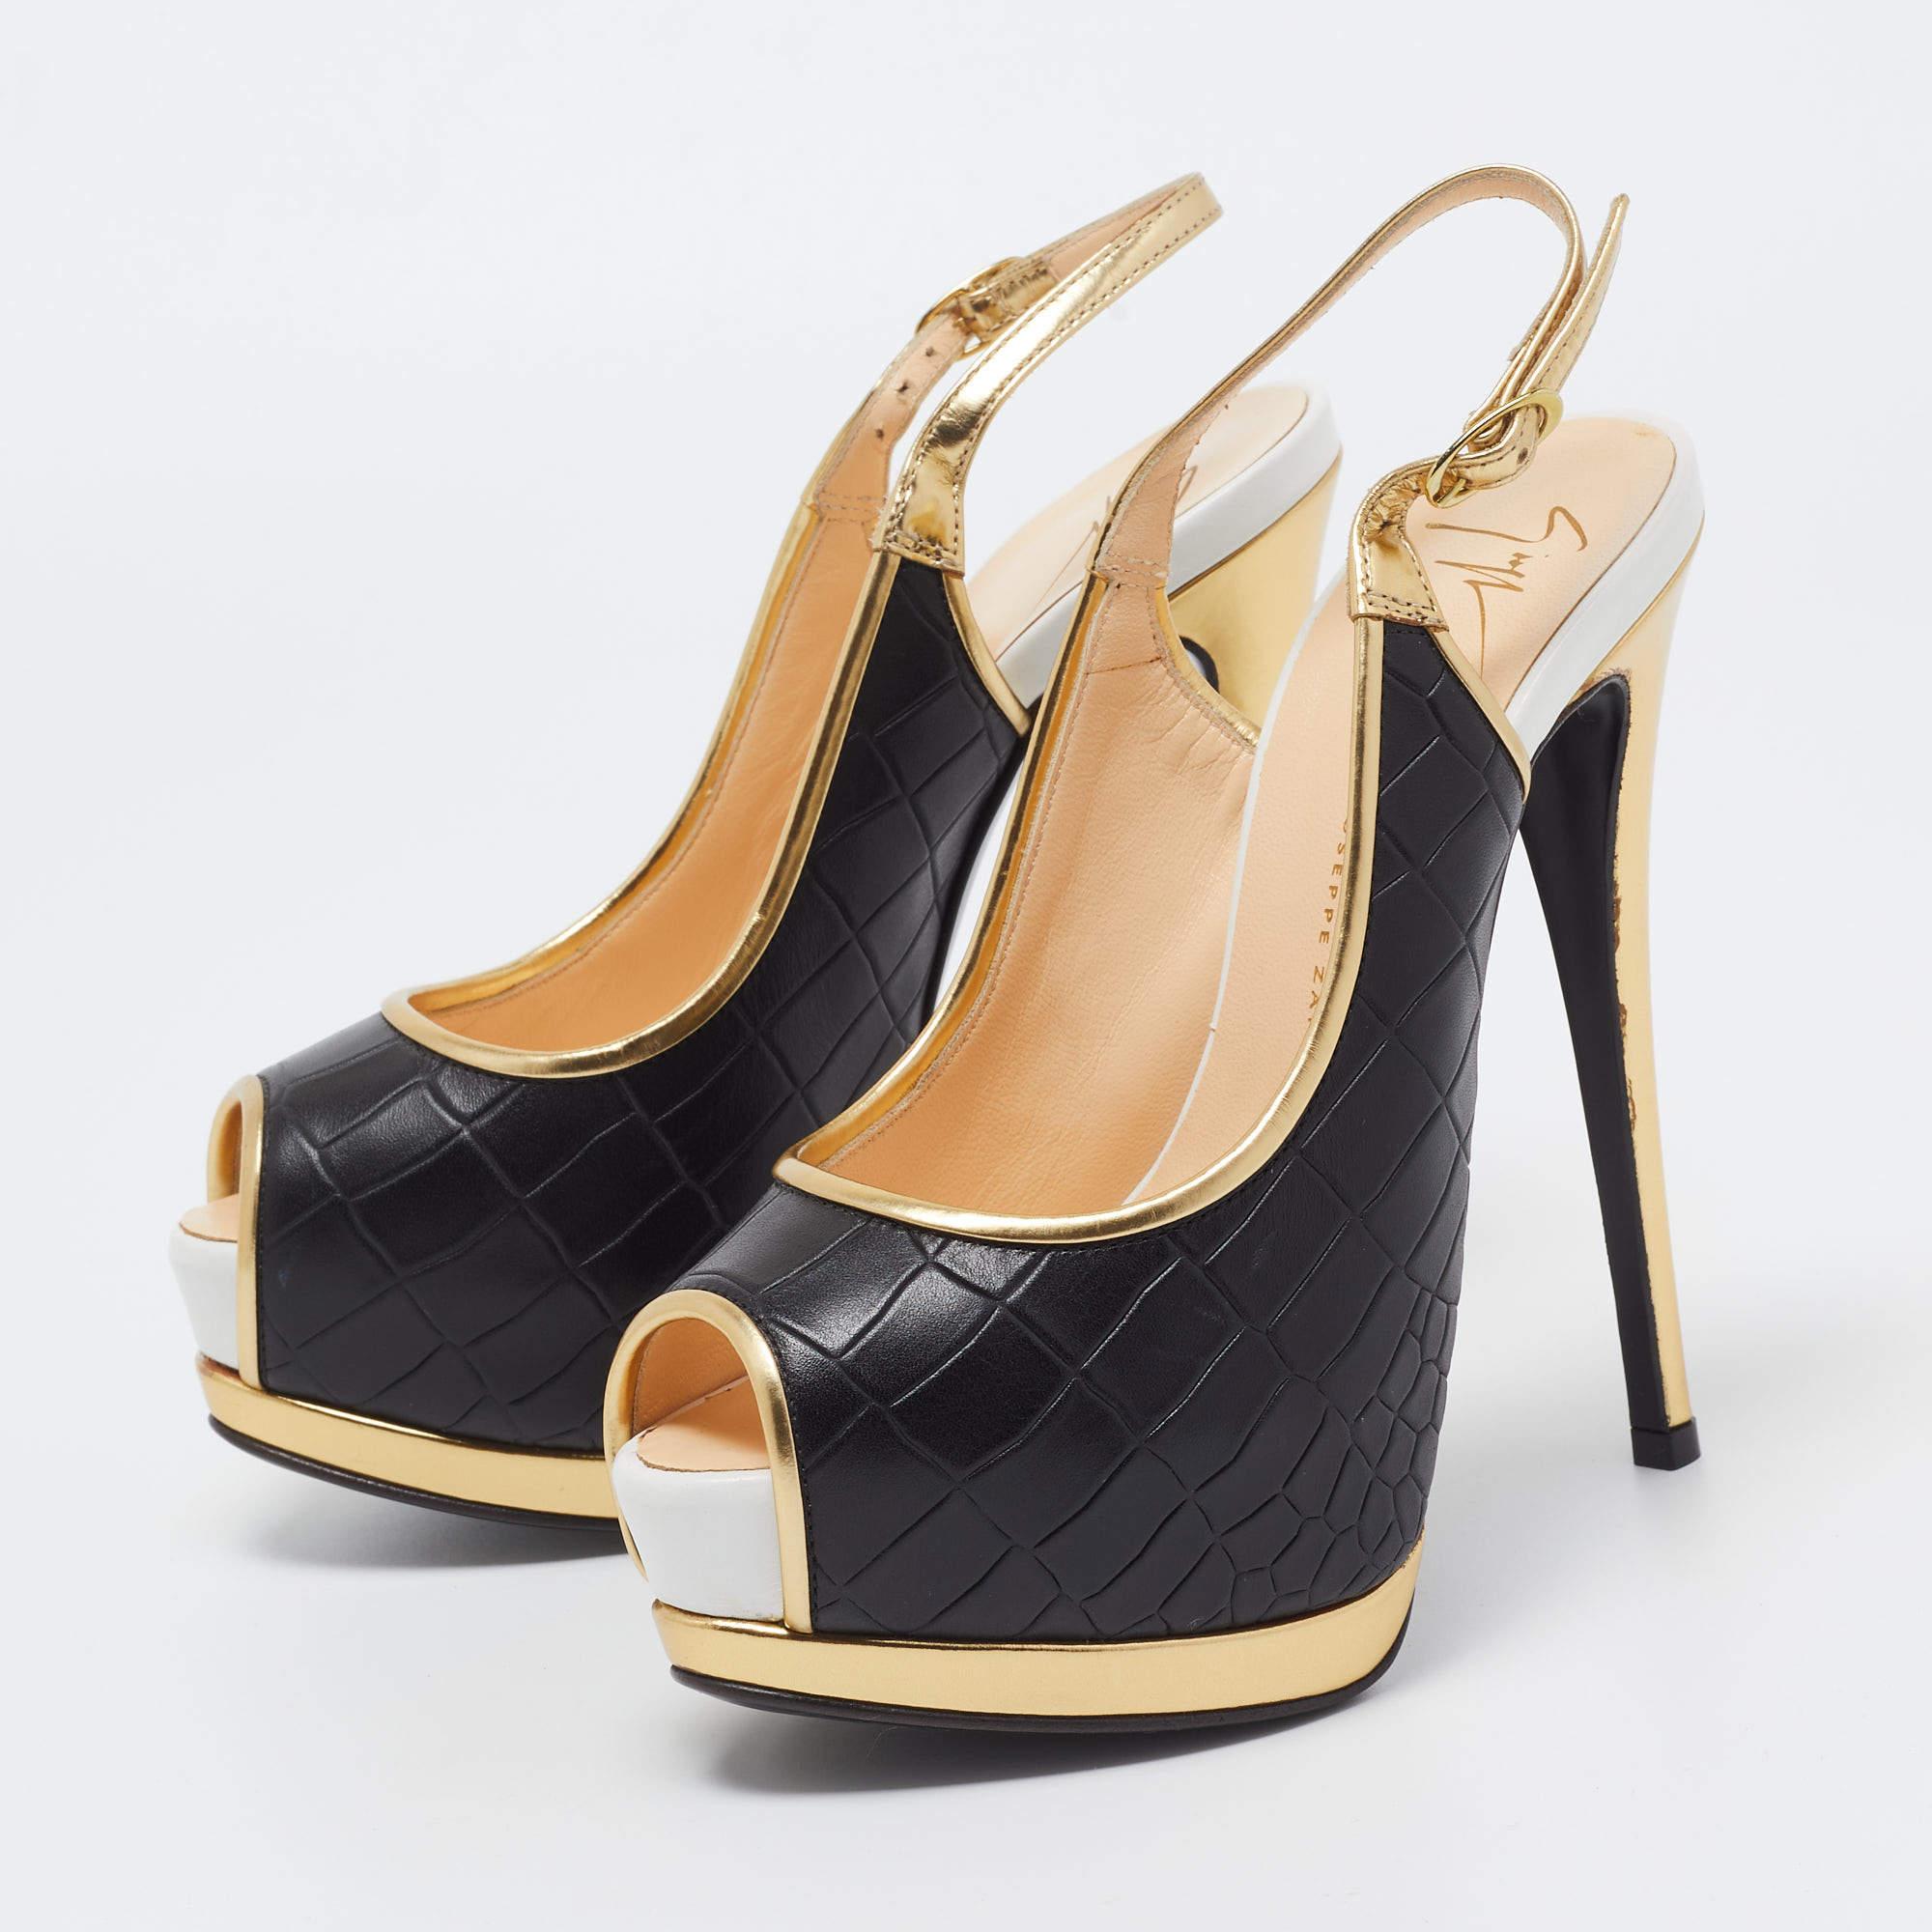 The fashion house’s tradition of excellence, coupled with modern design sensibilities, works to make these pumps a fabulous choice. They'll help you deliver a chic look with ease.

